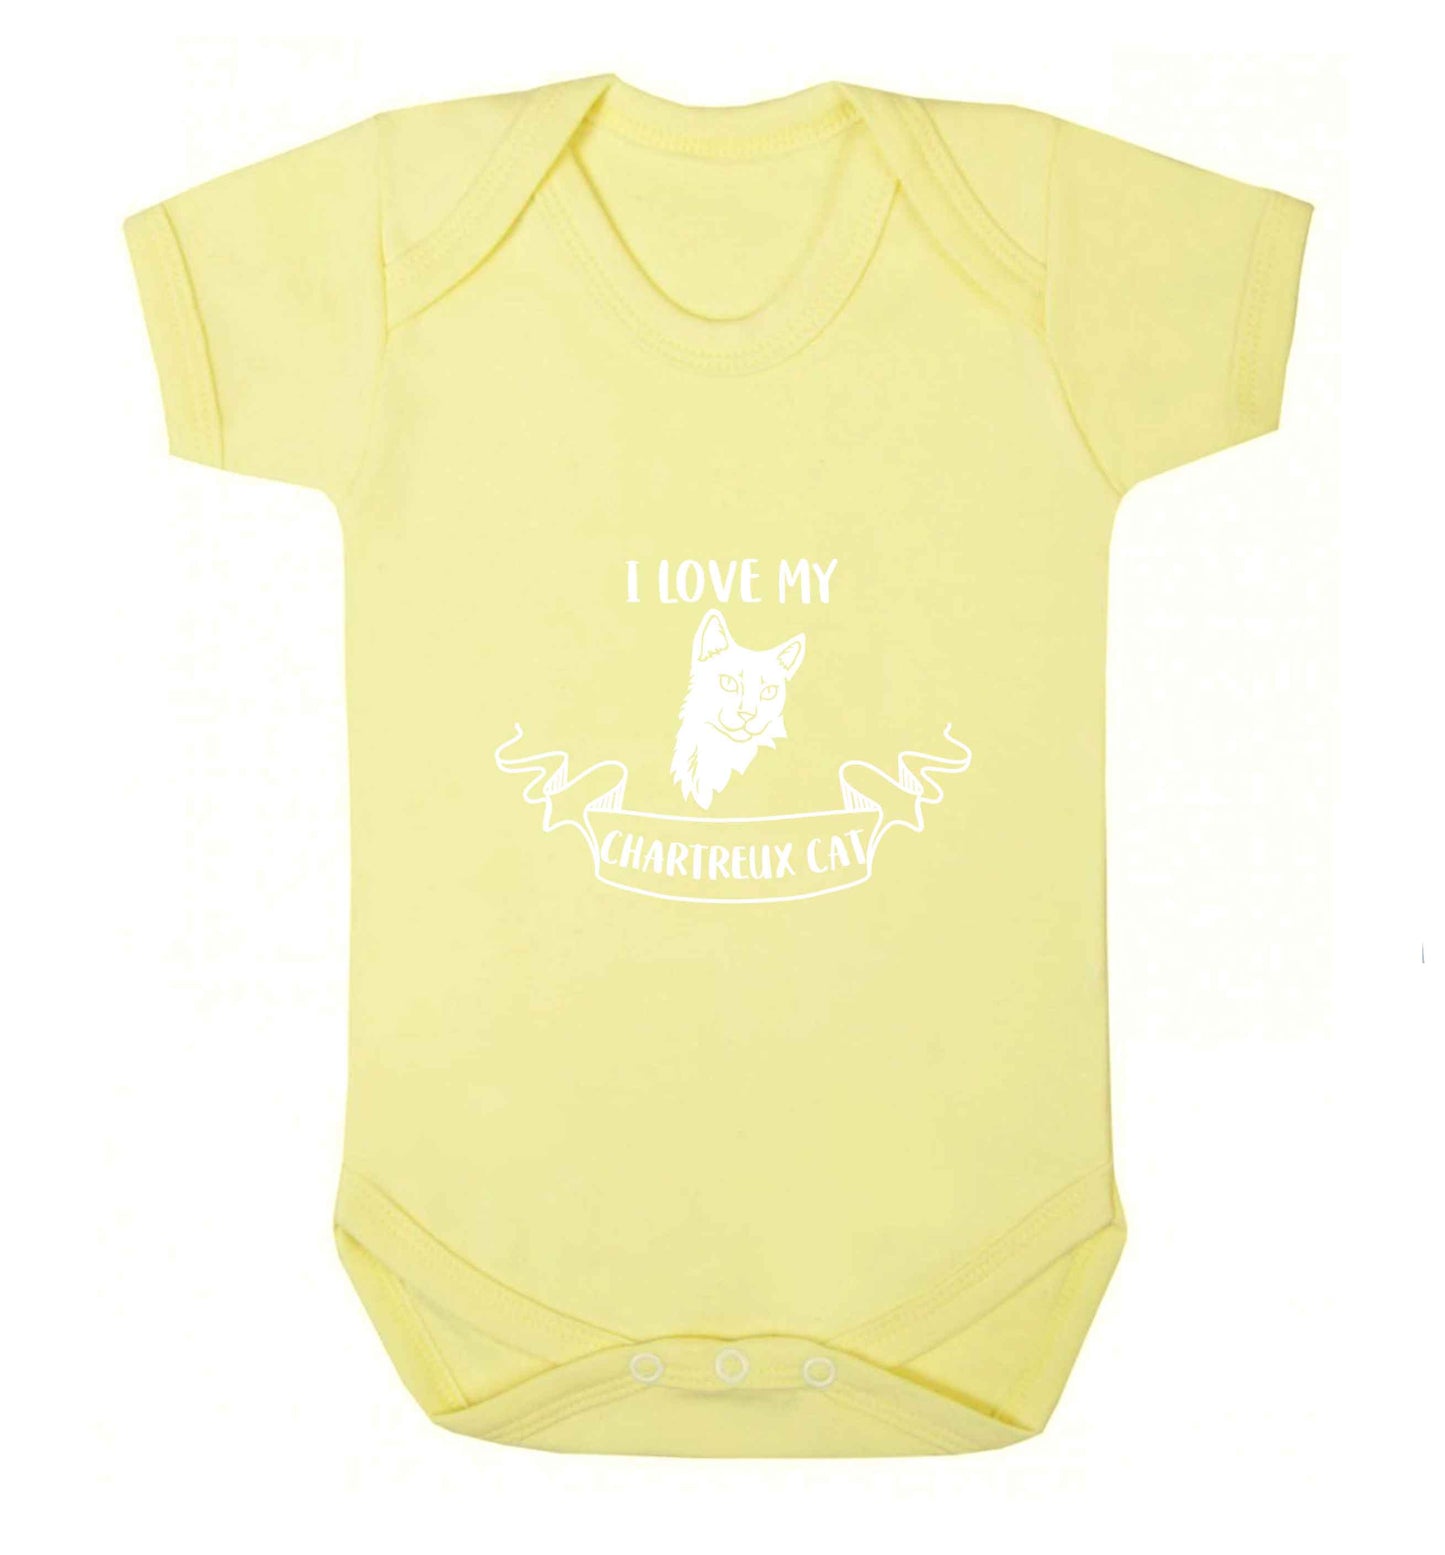 I love my chartreux cat baby vest pale yellow 18-24 months